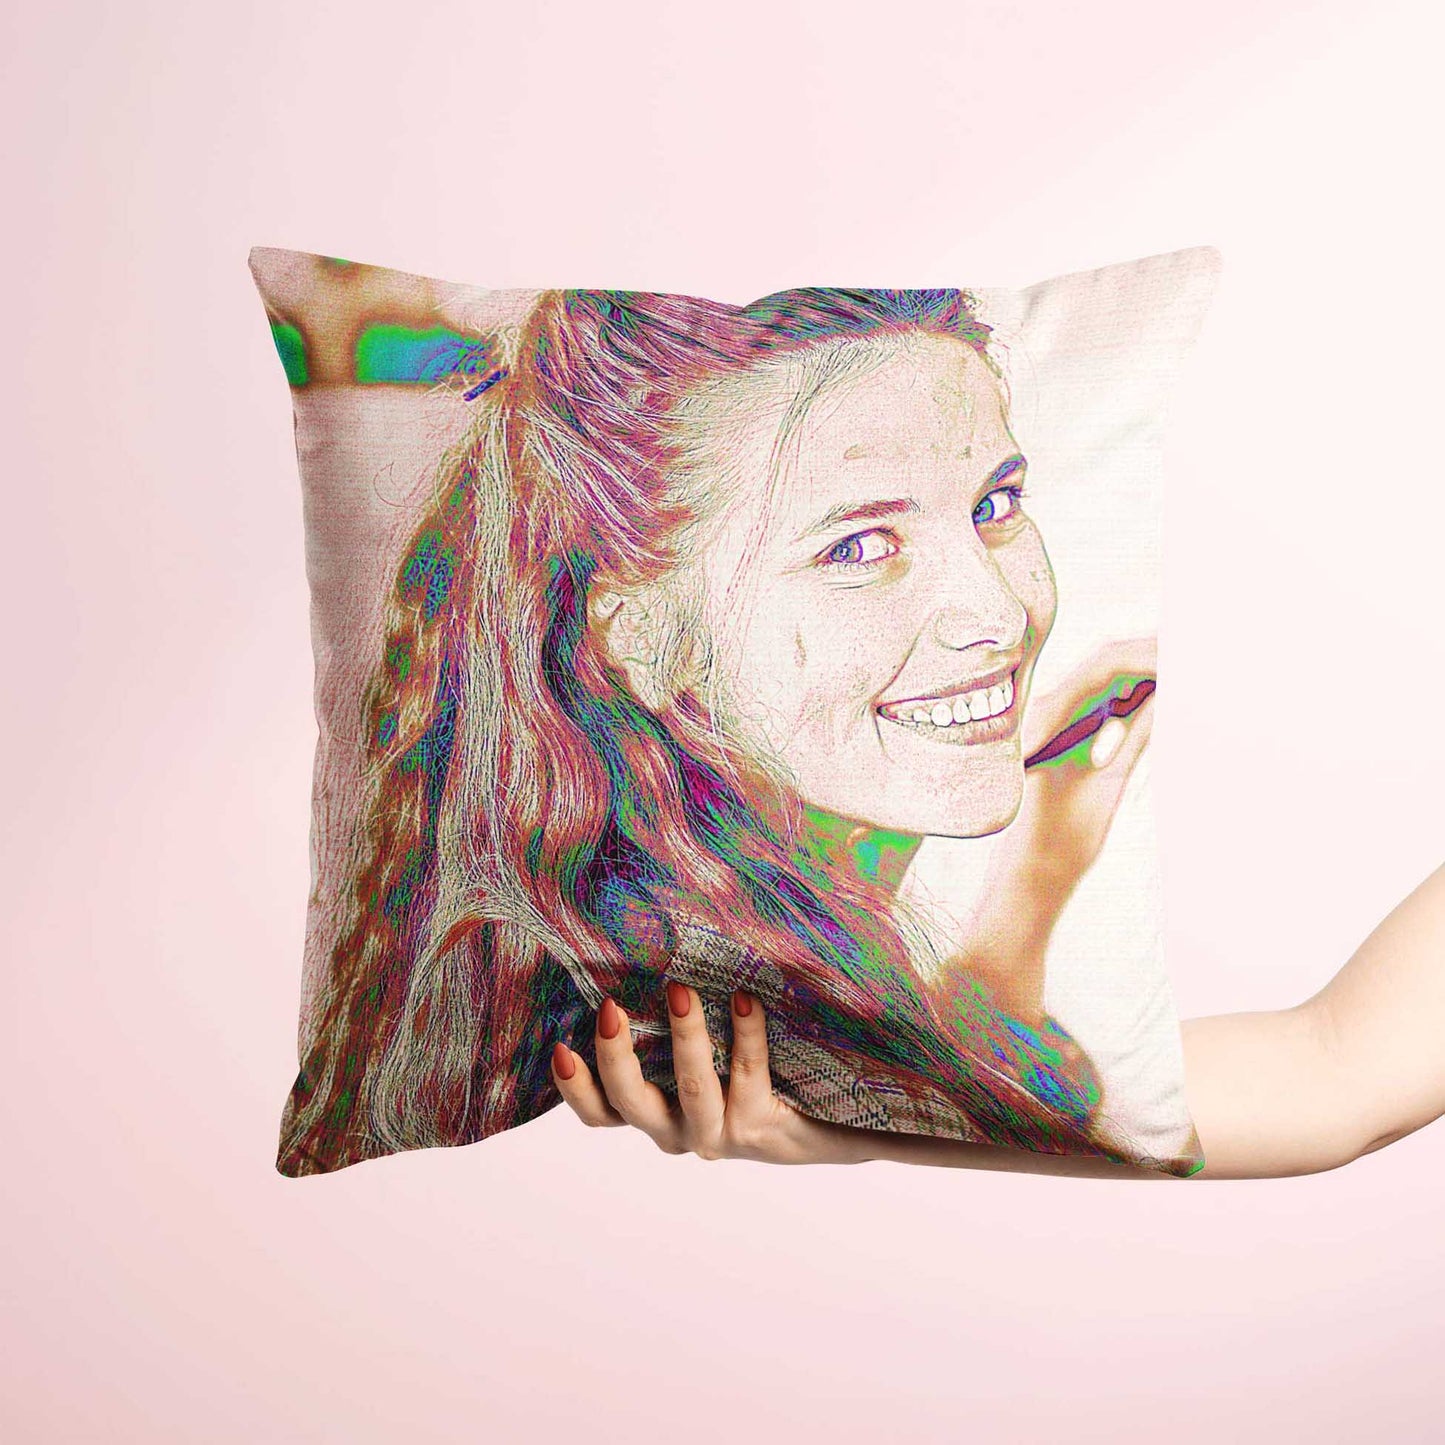 Experience the perfect blend of comfort and artistry with the Personalised Pencil Drawing Cushion. Its soft velvet fabric provides a cozy touch, while the print from your photo transforms it into a one-of-a-kind masterpiece. Handmade 